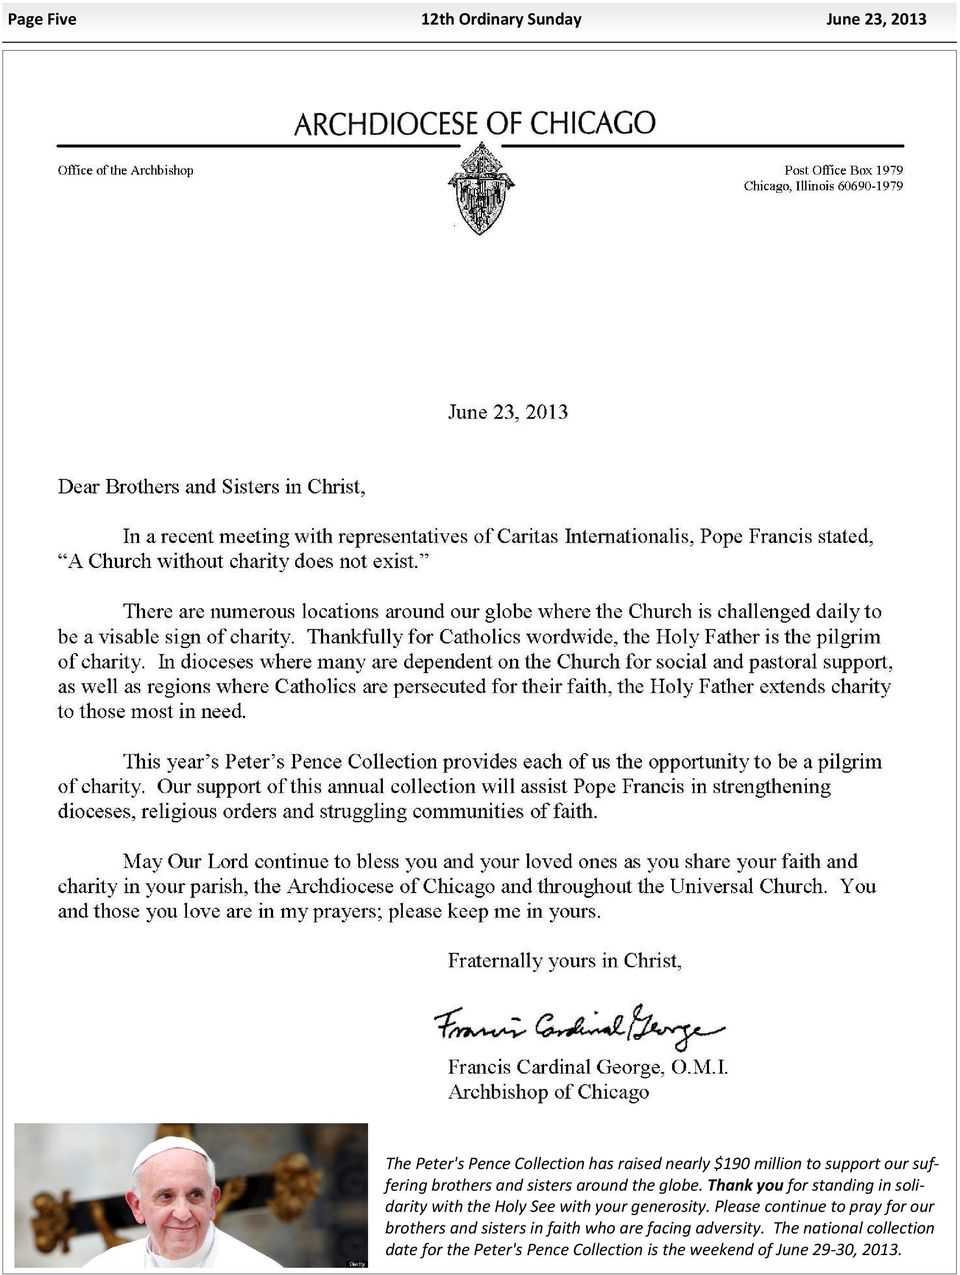 Thank you for standing in solidarity with the Holy See with your generosity.